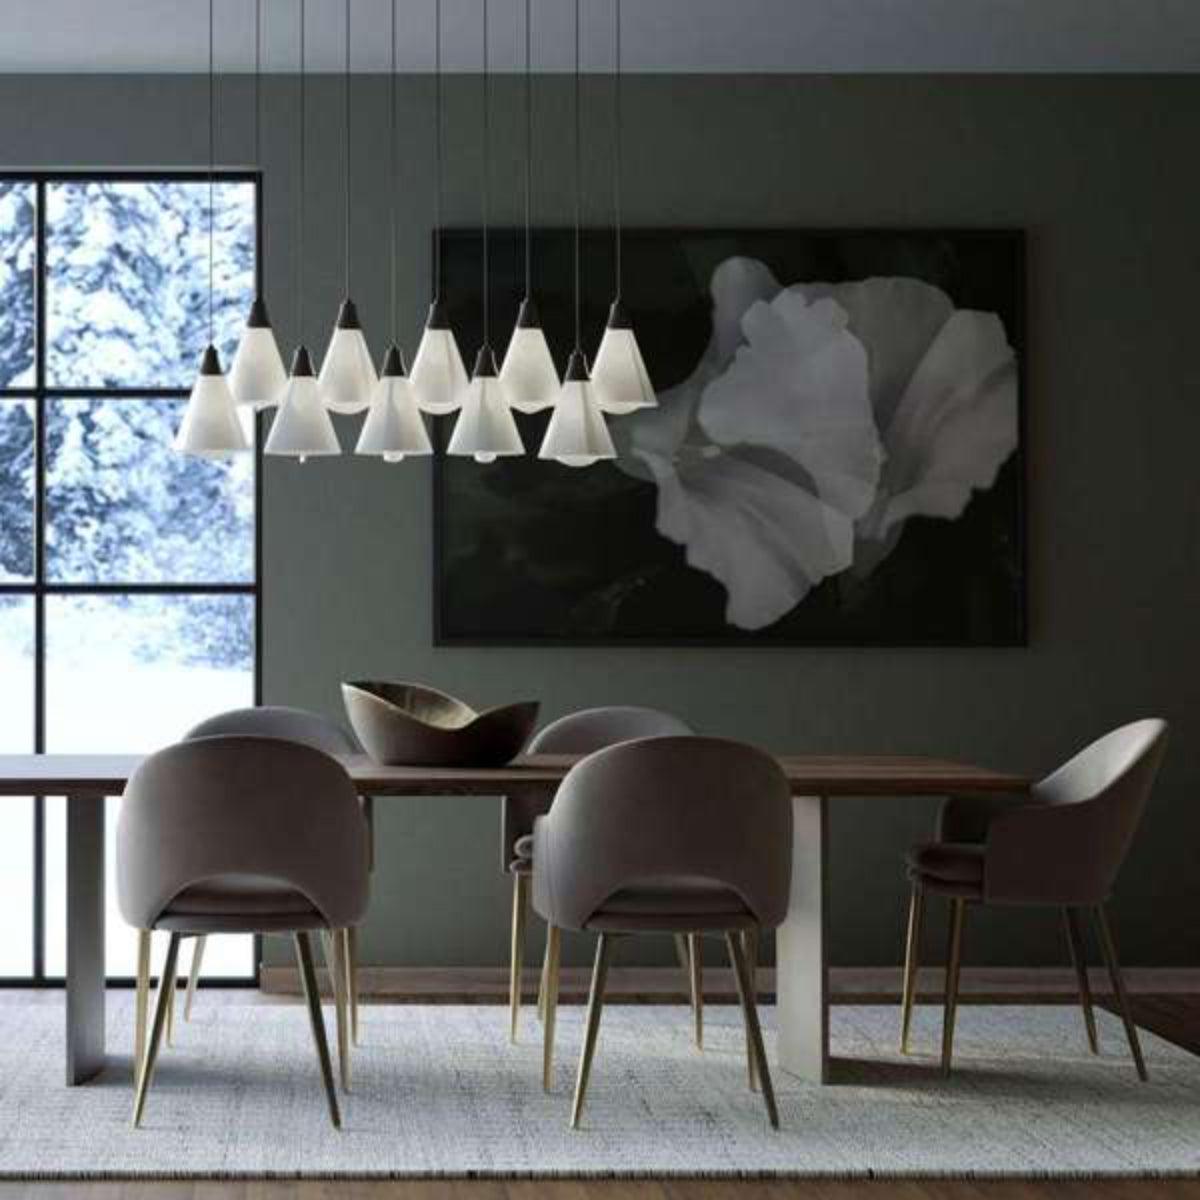 Mobius 46 in. 10 Lights Linear Pendant Light with Long